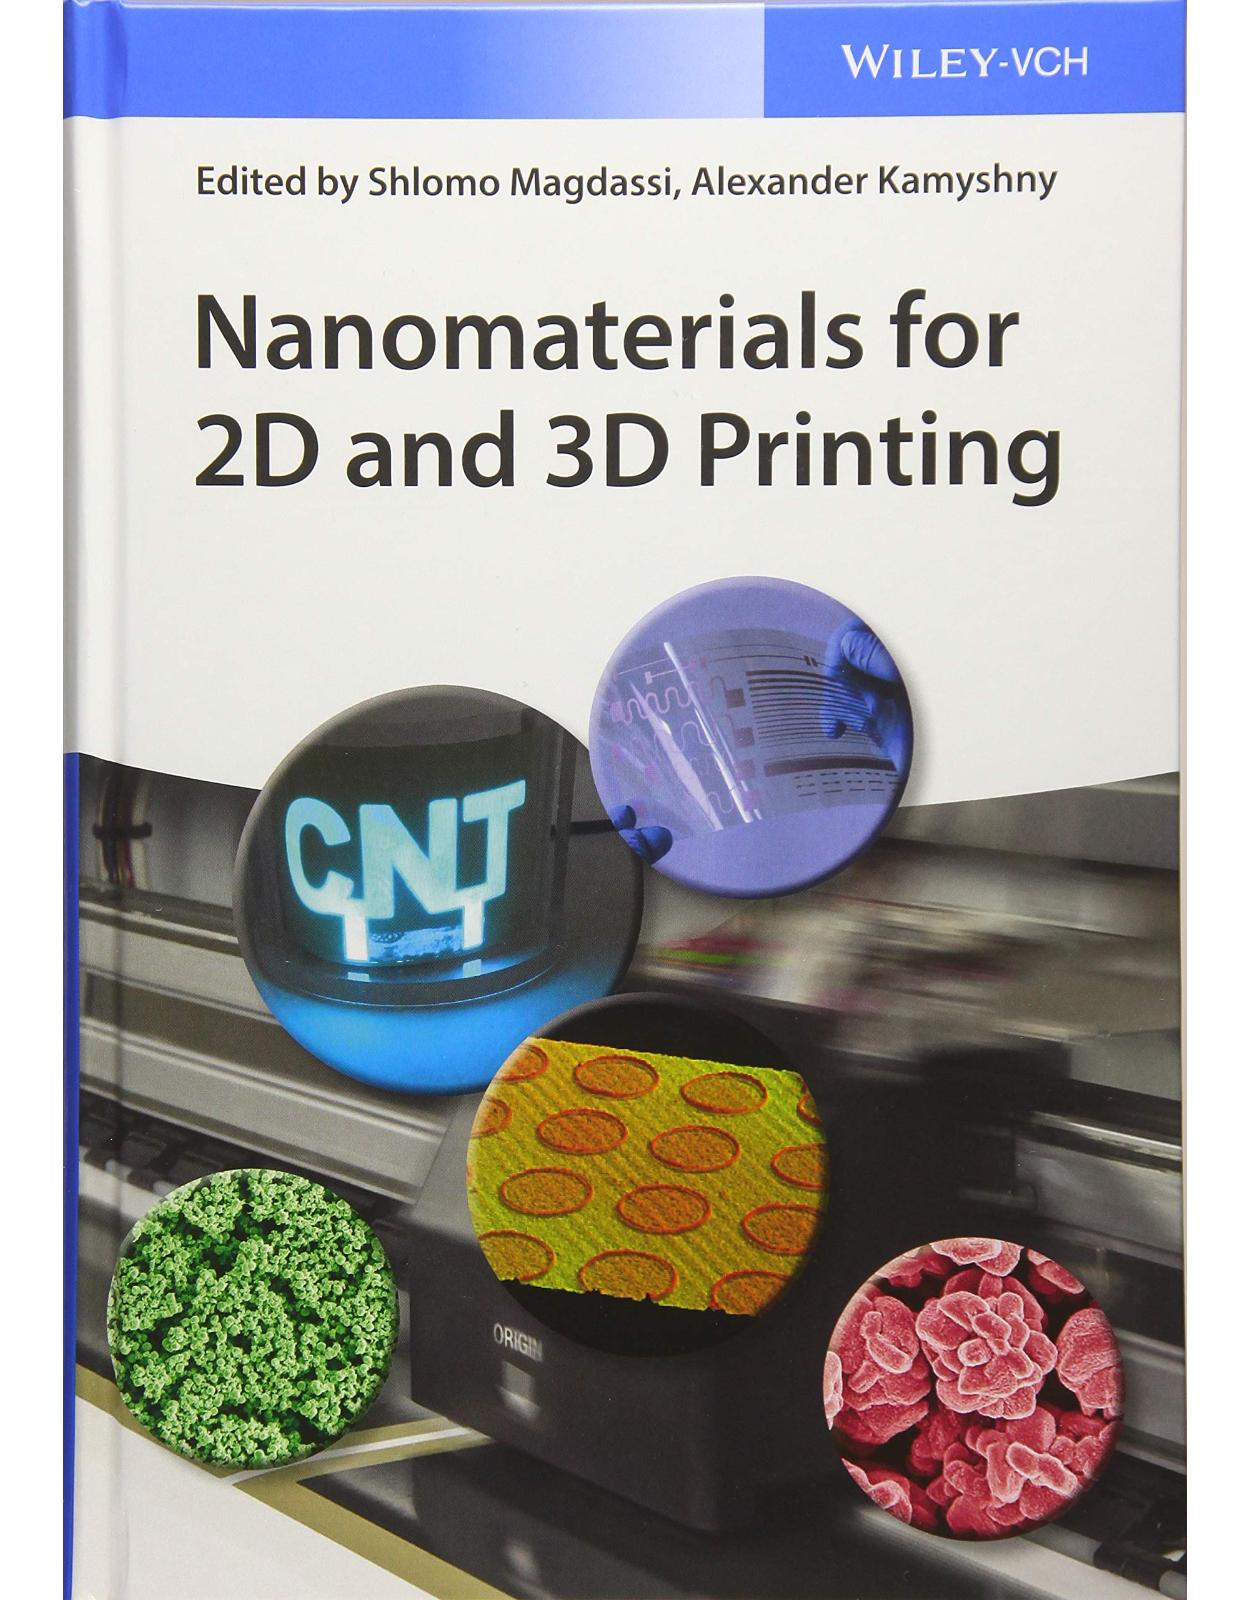 Nanomaterials for 2D and 3D Printing